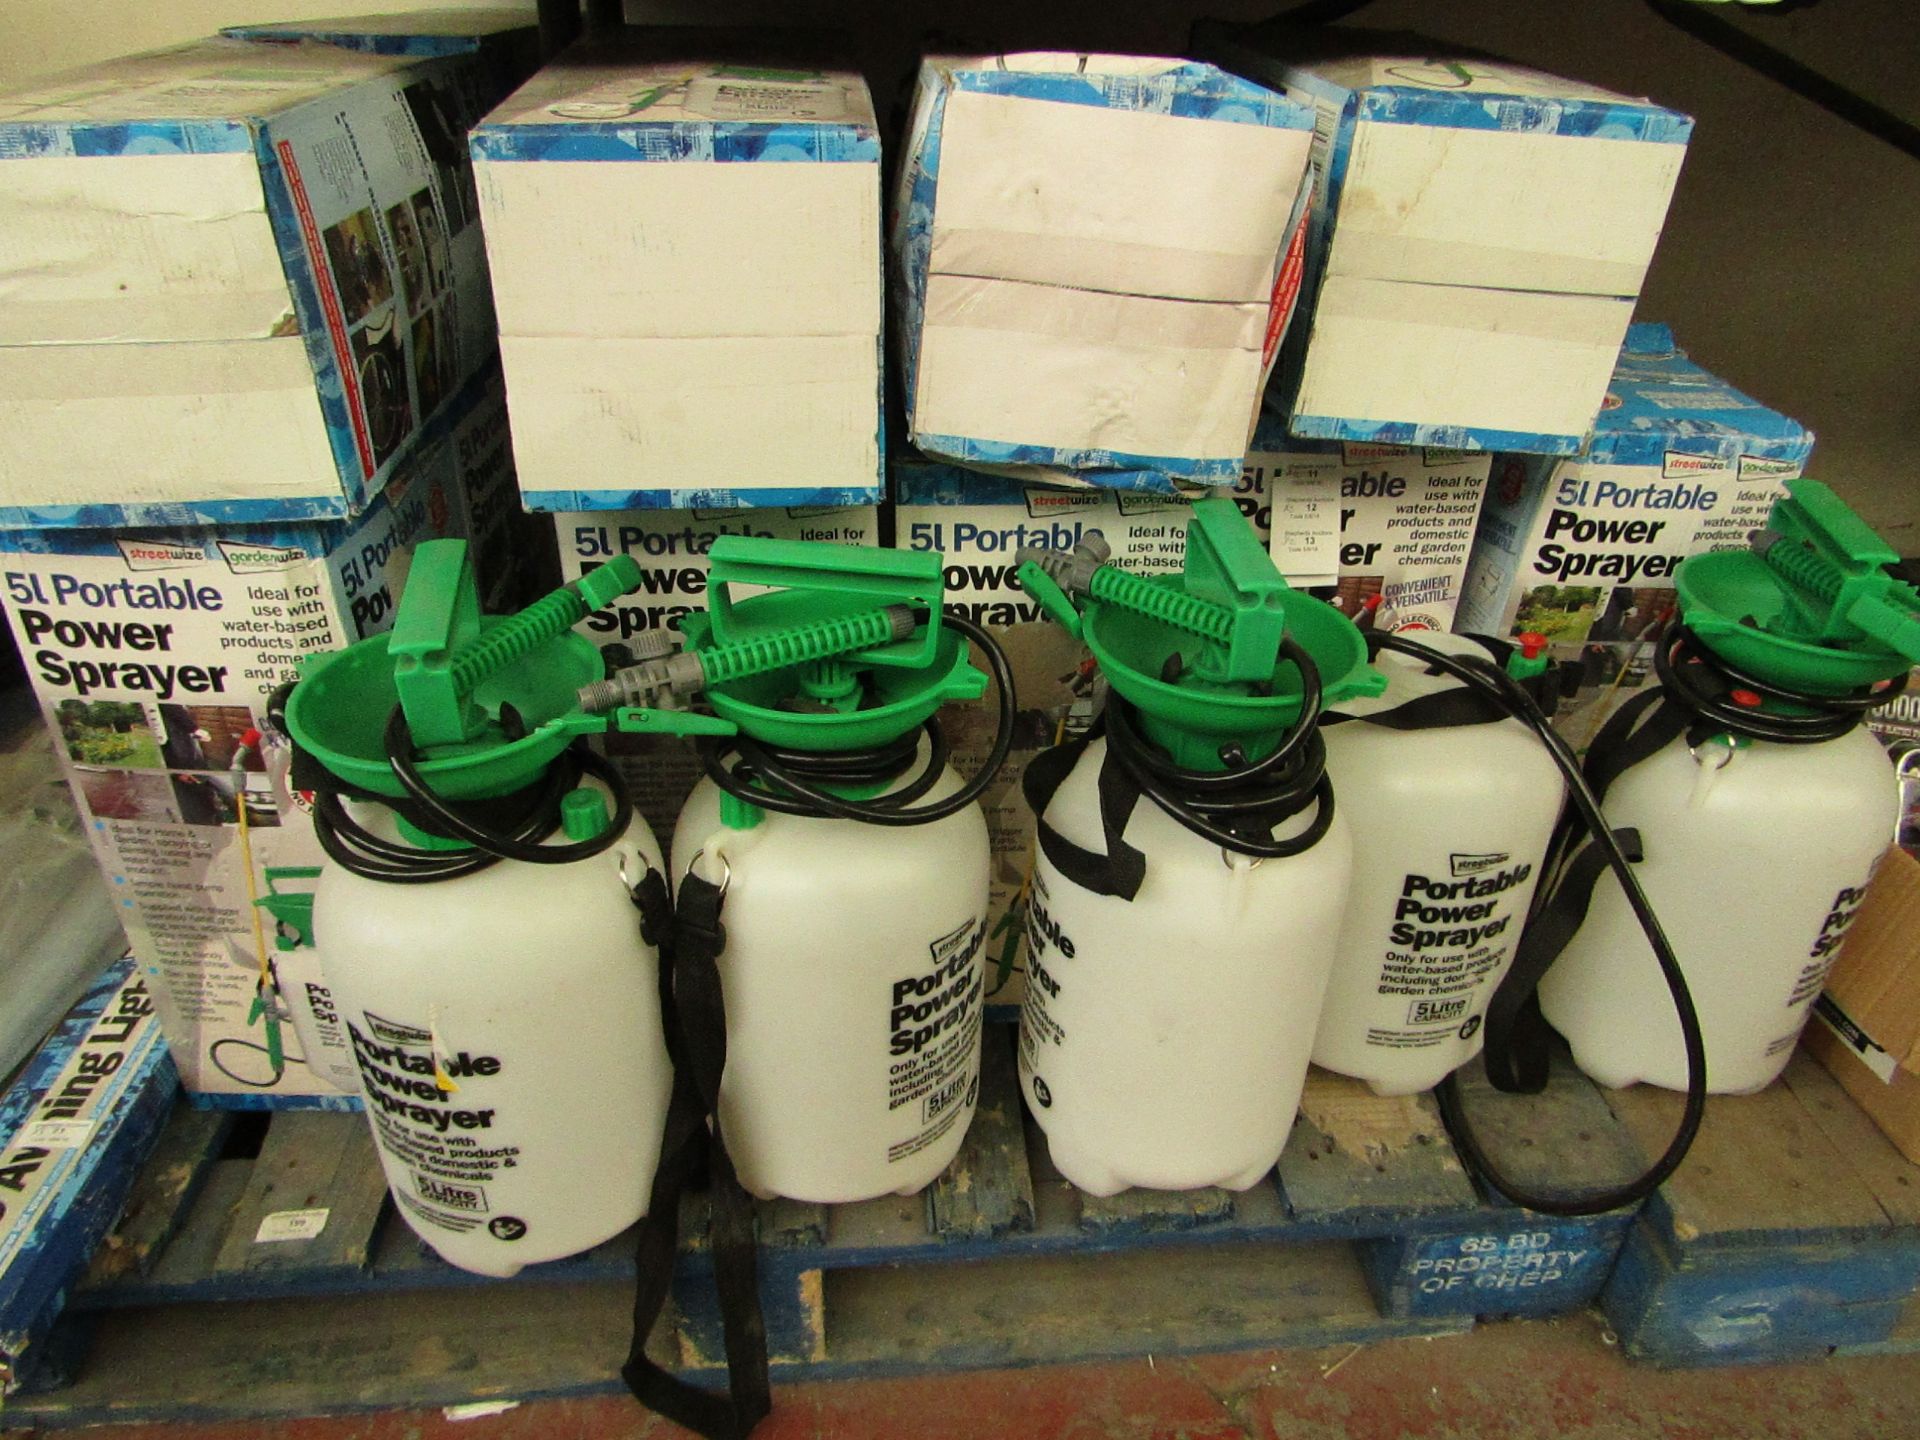 5x Streetwize 5L portable power sprayer, all unchecked and boxed.